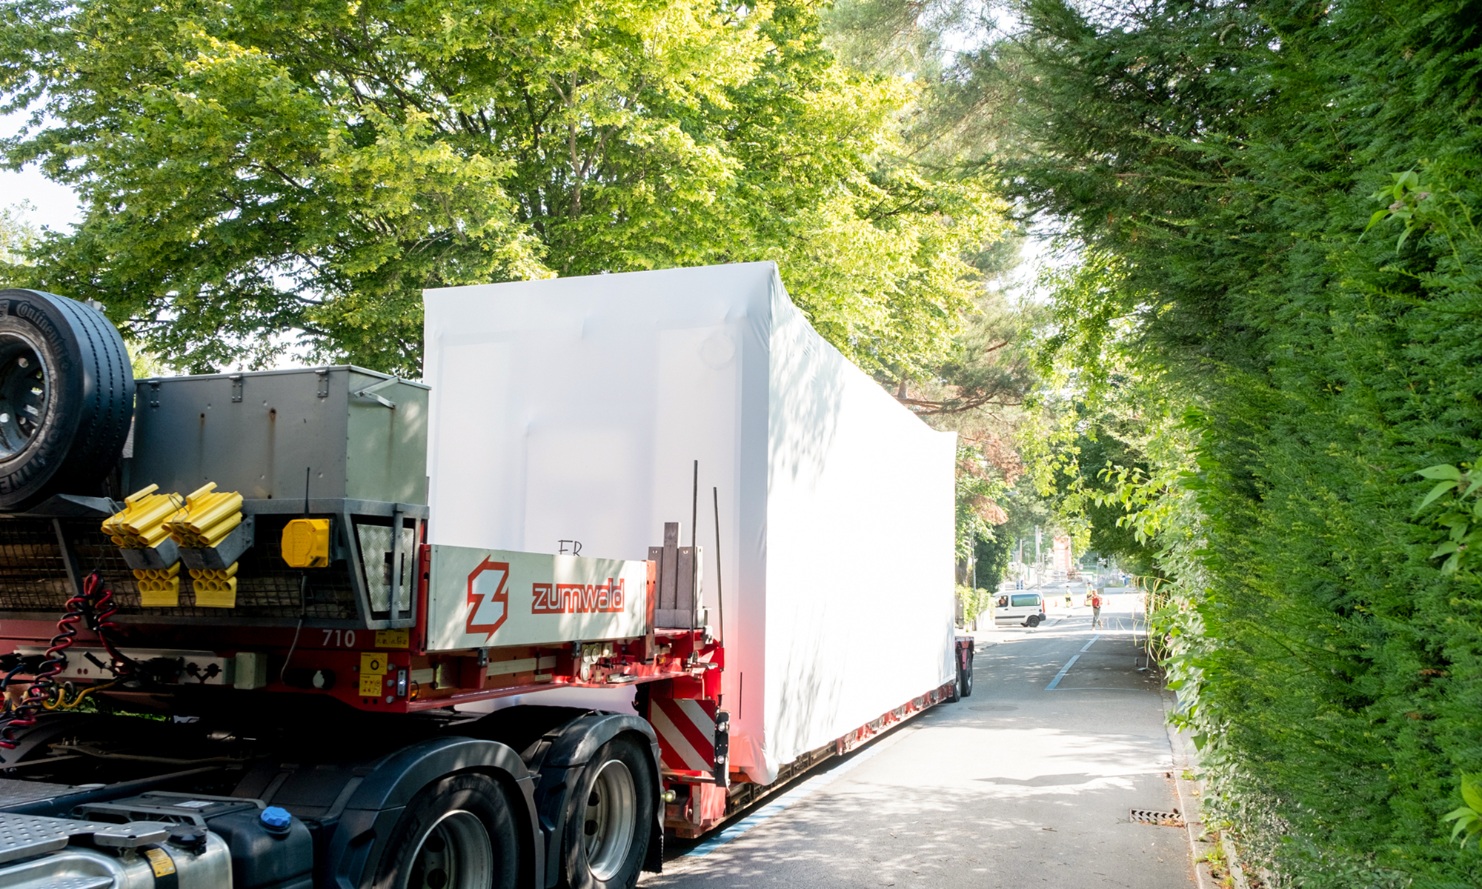 The ZM10 timber modules are transported by road on a low loader.